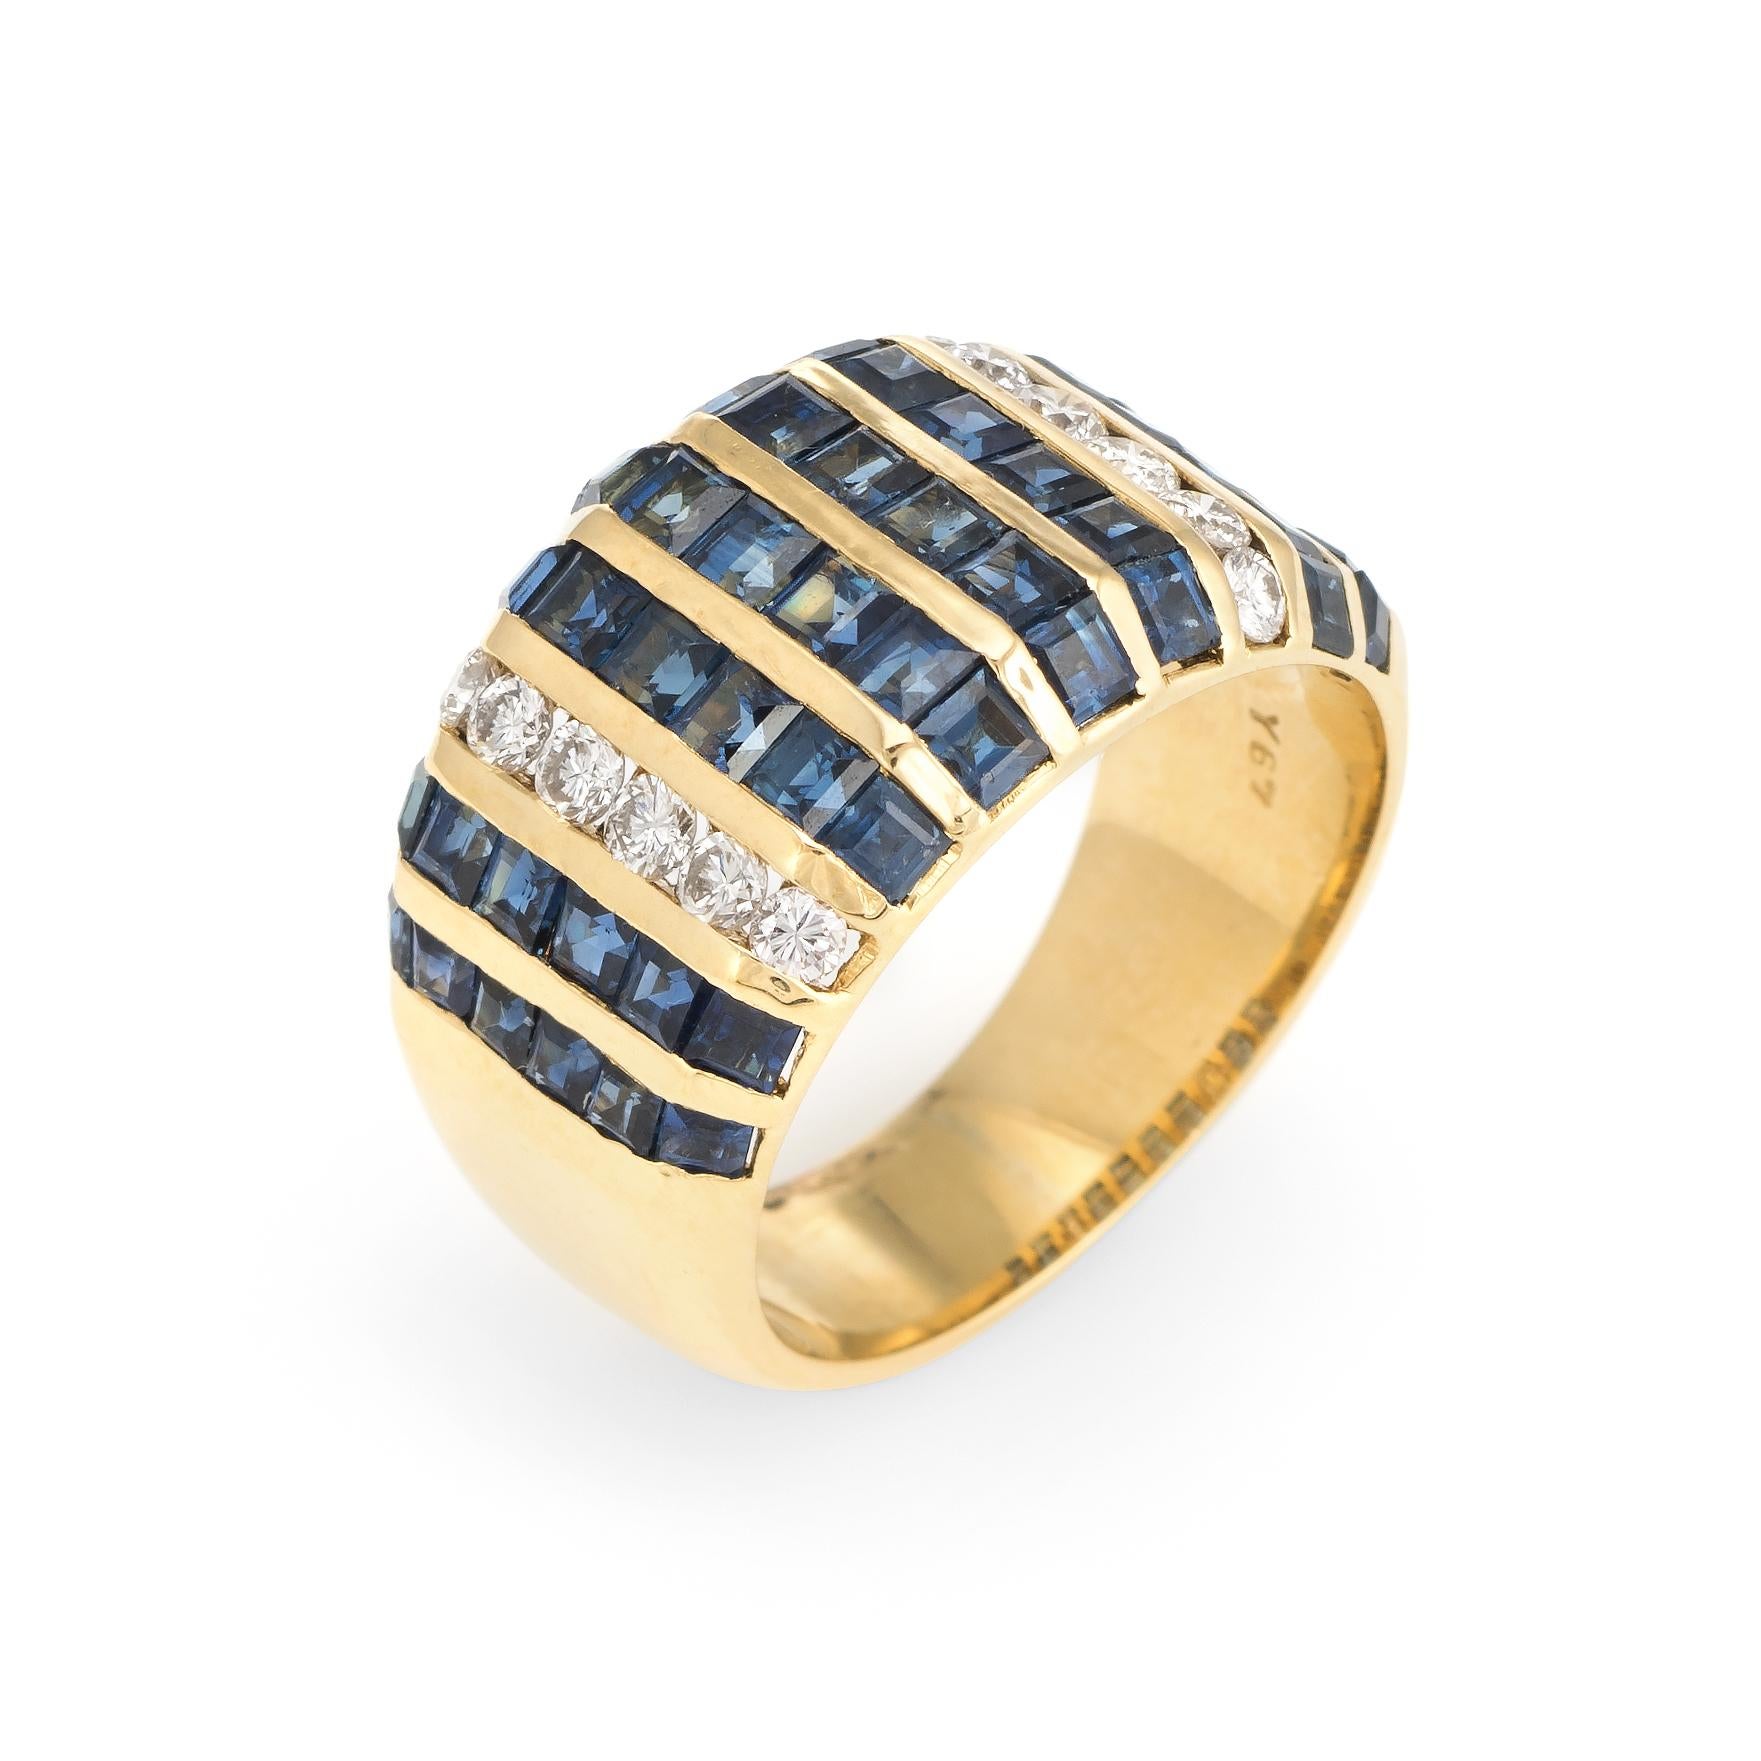 Distinct & stylish sapphire & diamond wide cigar band (circa 1980s), crafted in 18 karat yellow gold. 

Square cut sapphires are channel set into the band and total an estimated 2.15 carats. The diamonds are also channel set into the band and total